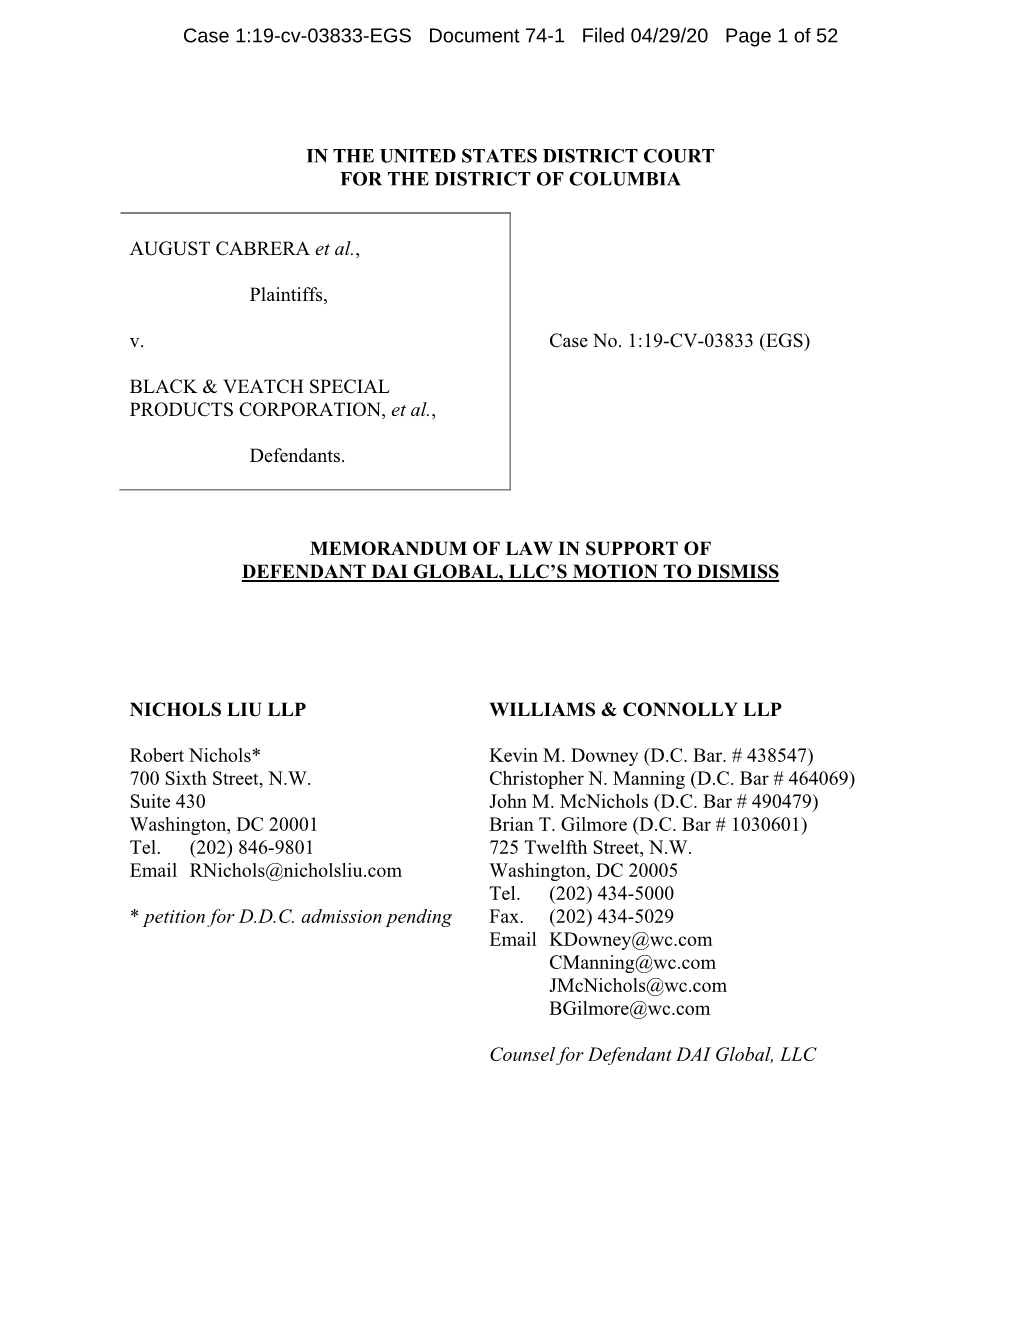 Case 1:19-Cv-03833-EGS Document 74-1 Filed 04/29/20 Page 1 of 52